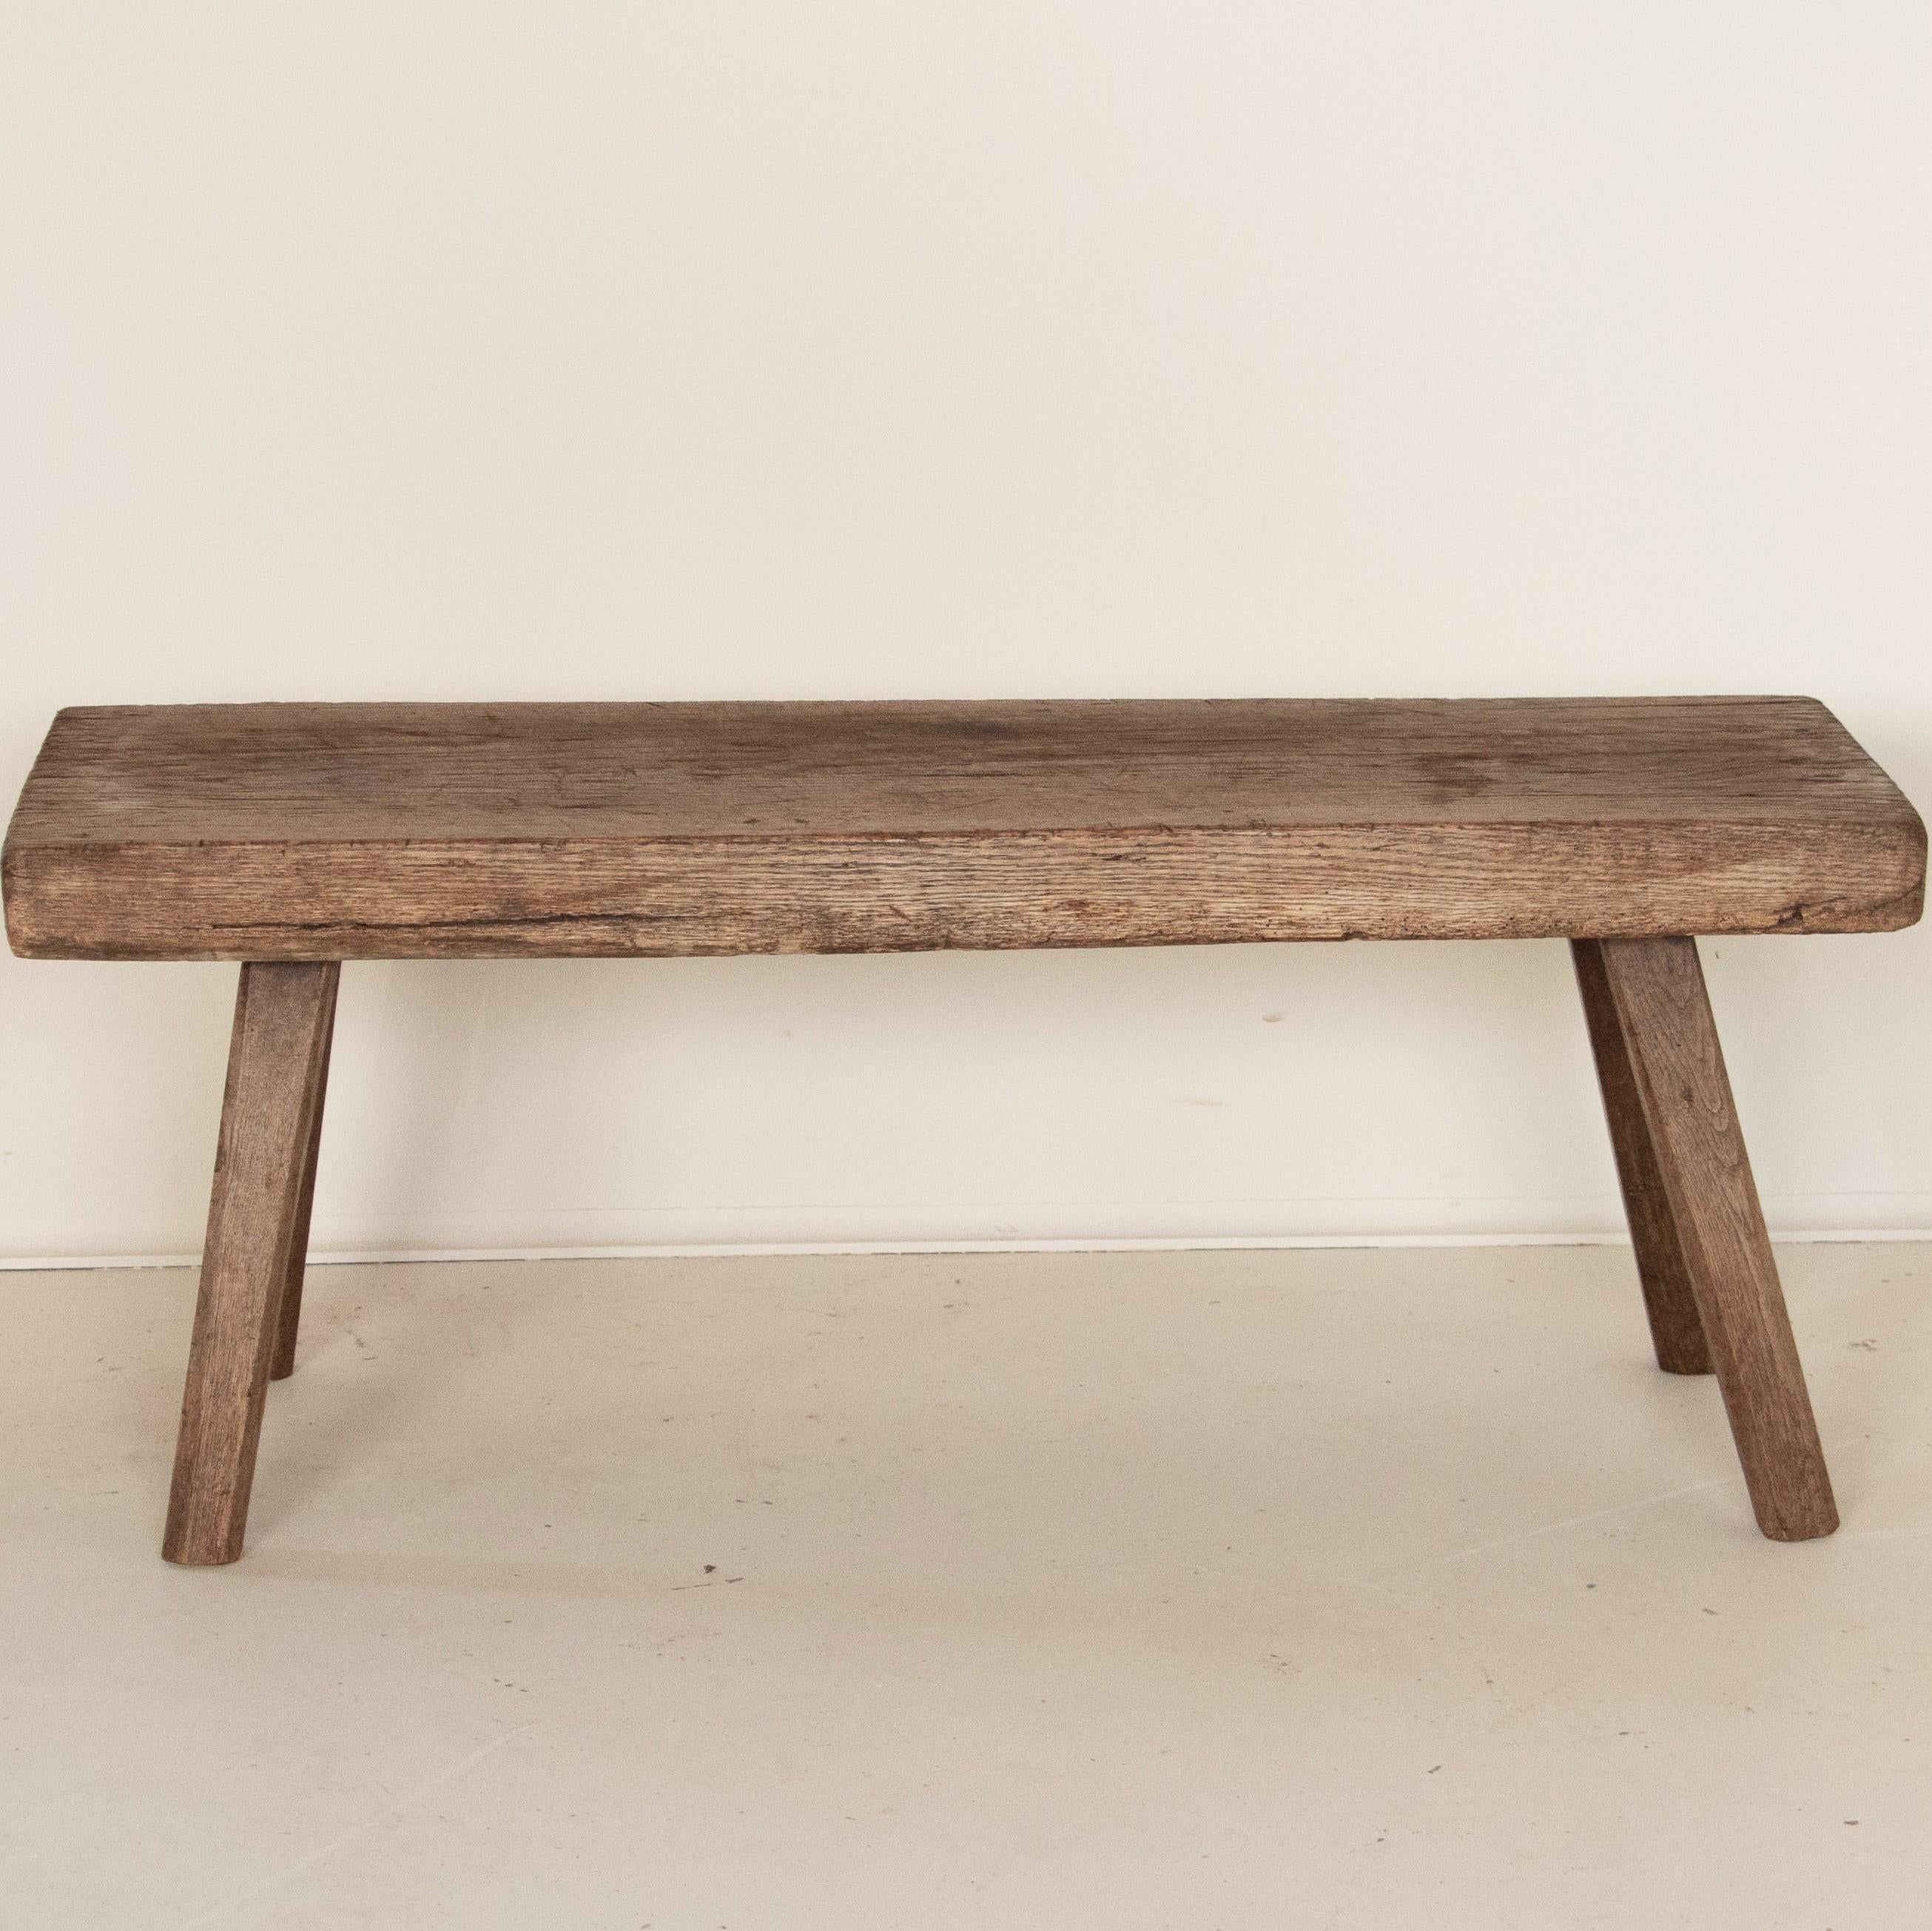 There is something organic and inviting in the thick wood top of this rustic peg leg bench. It is the years of use that have deepened its character, with a wonderful worn patina grown richer over time. While it was likely that it originally served